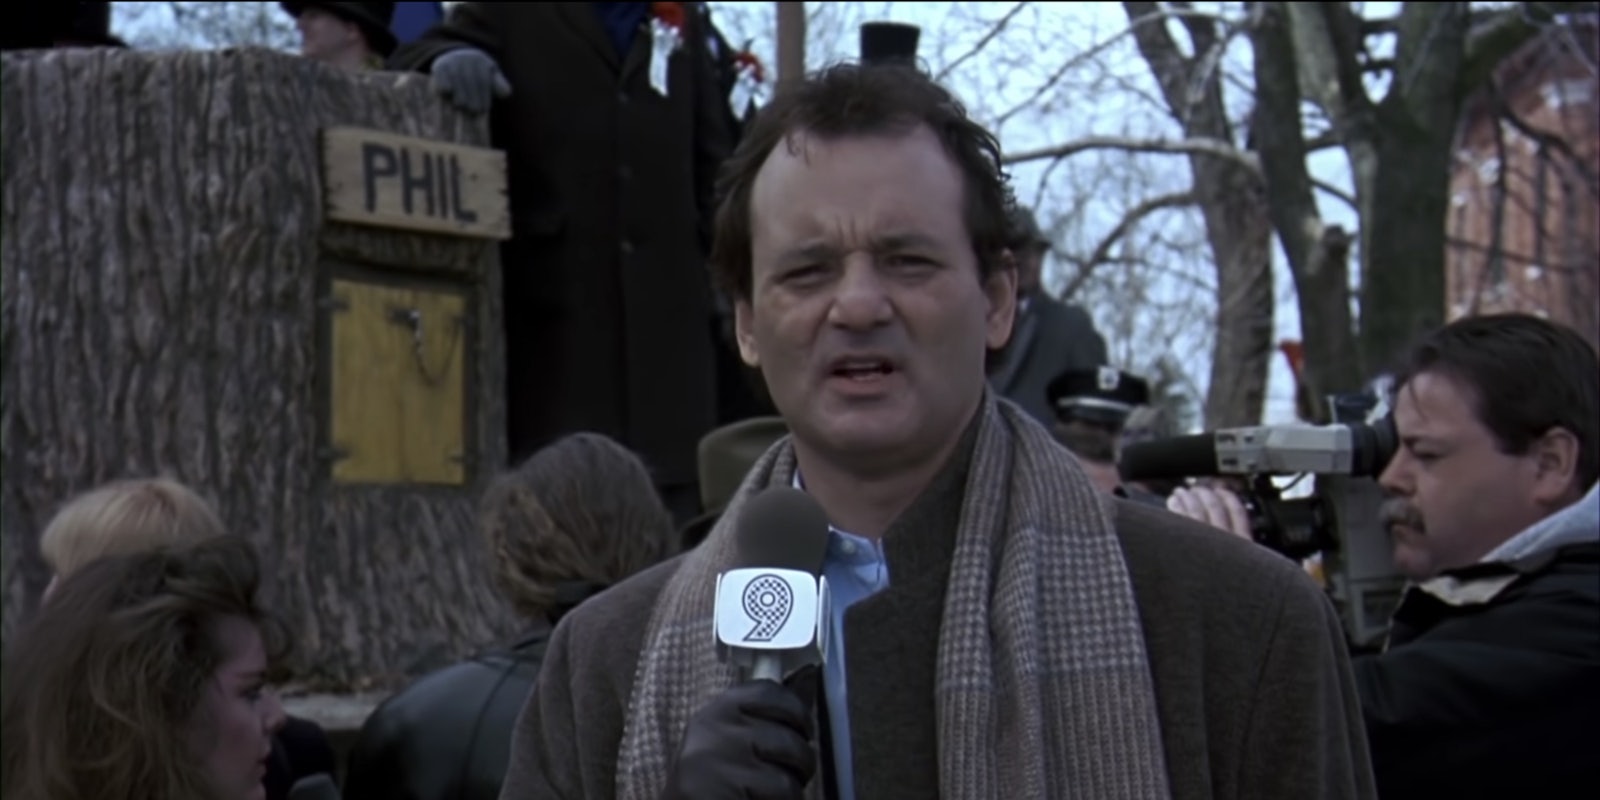 Image from Groundhog Day showing Bill Murray.